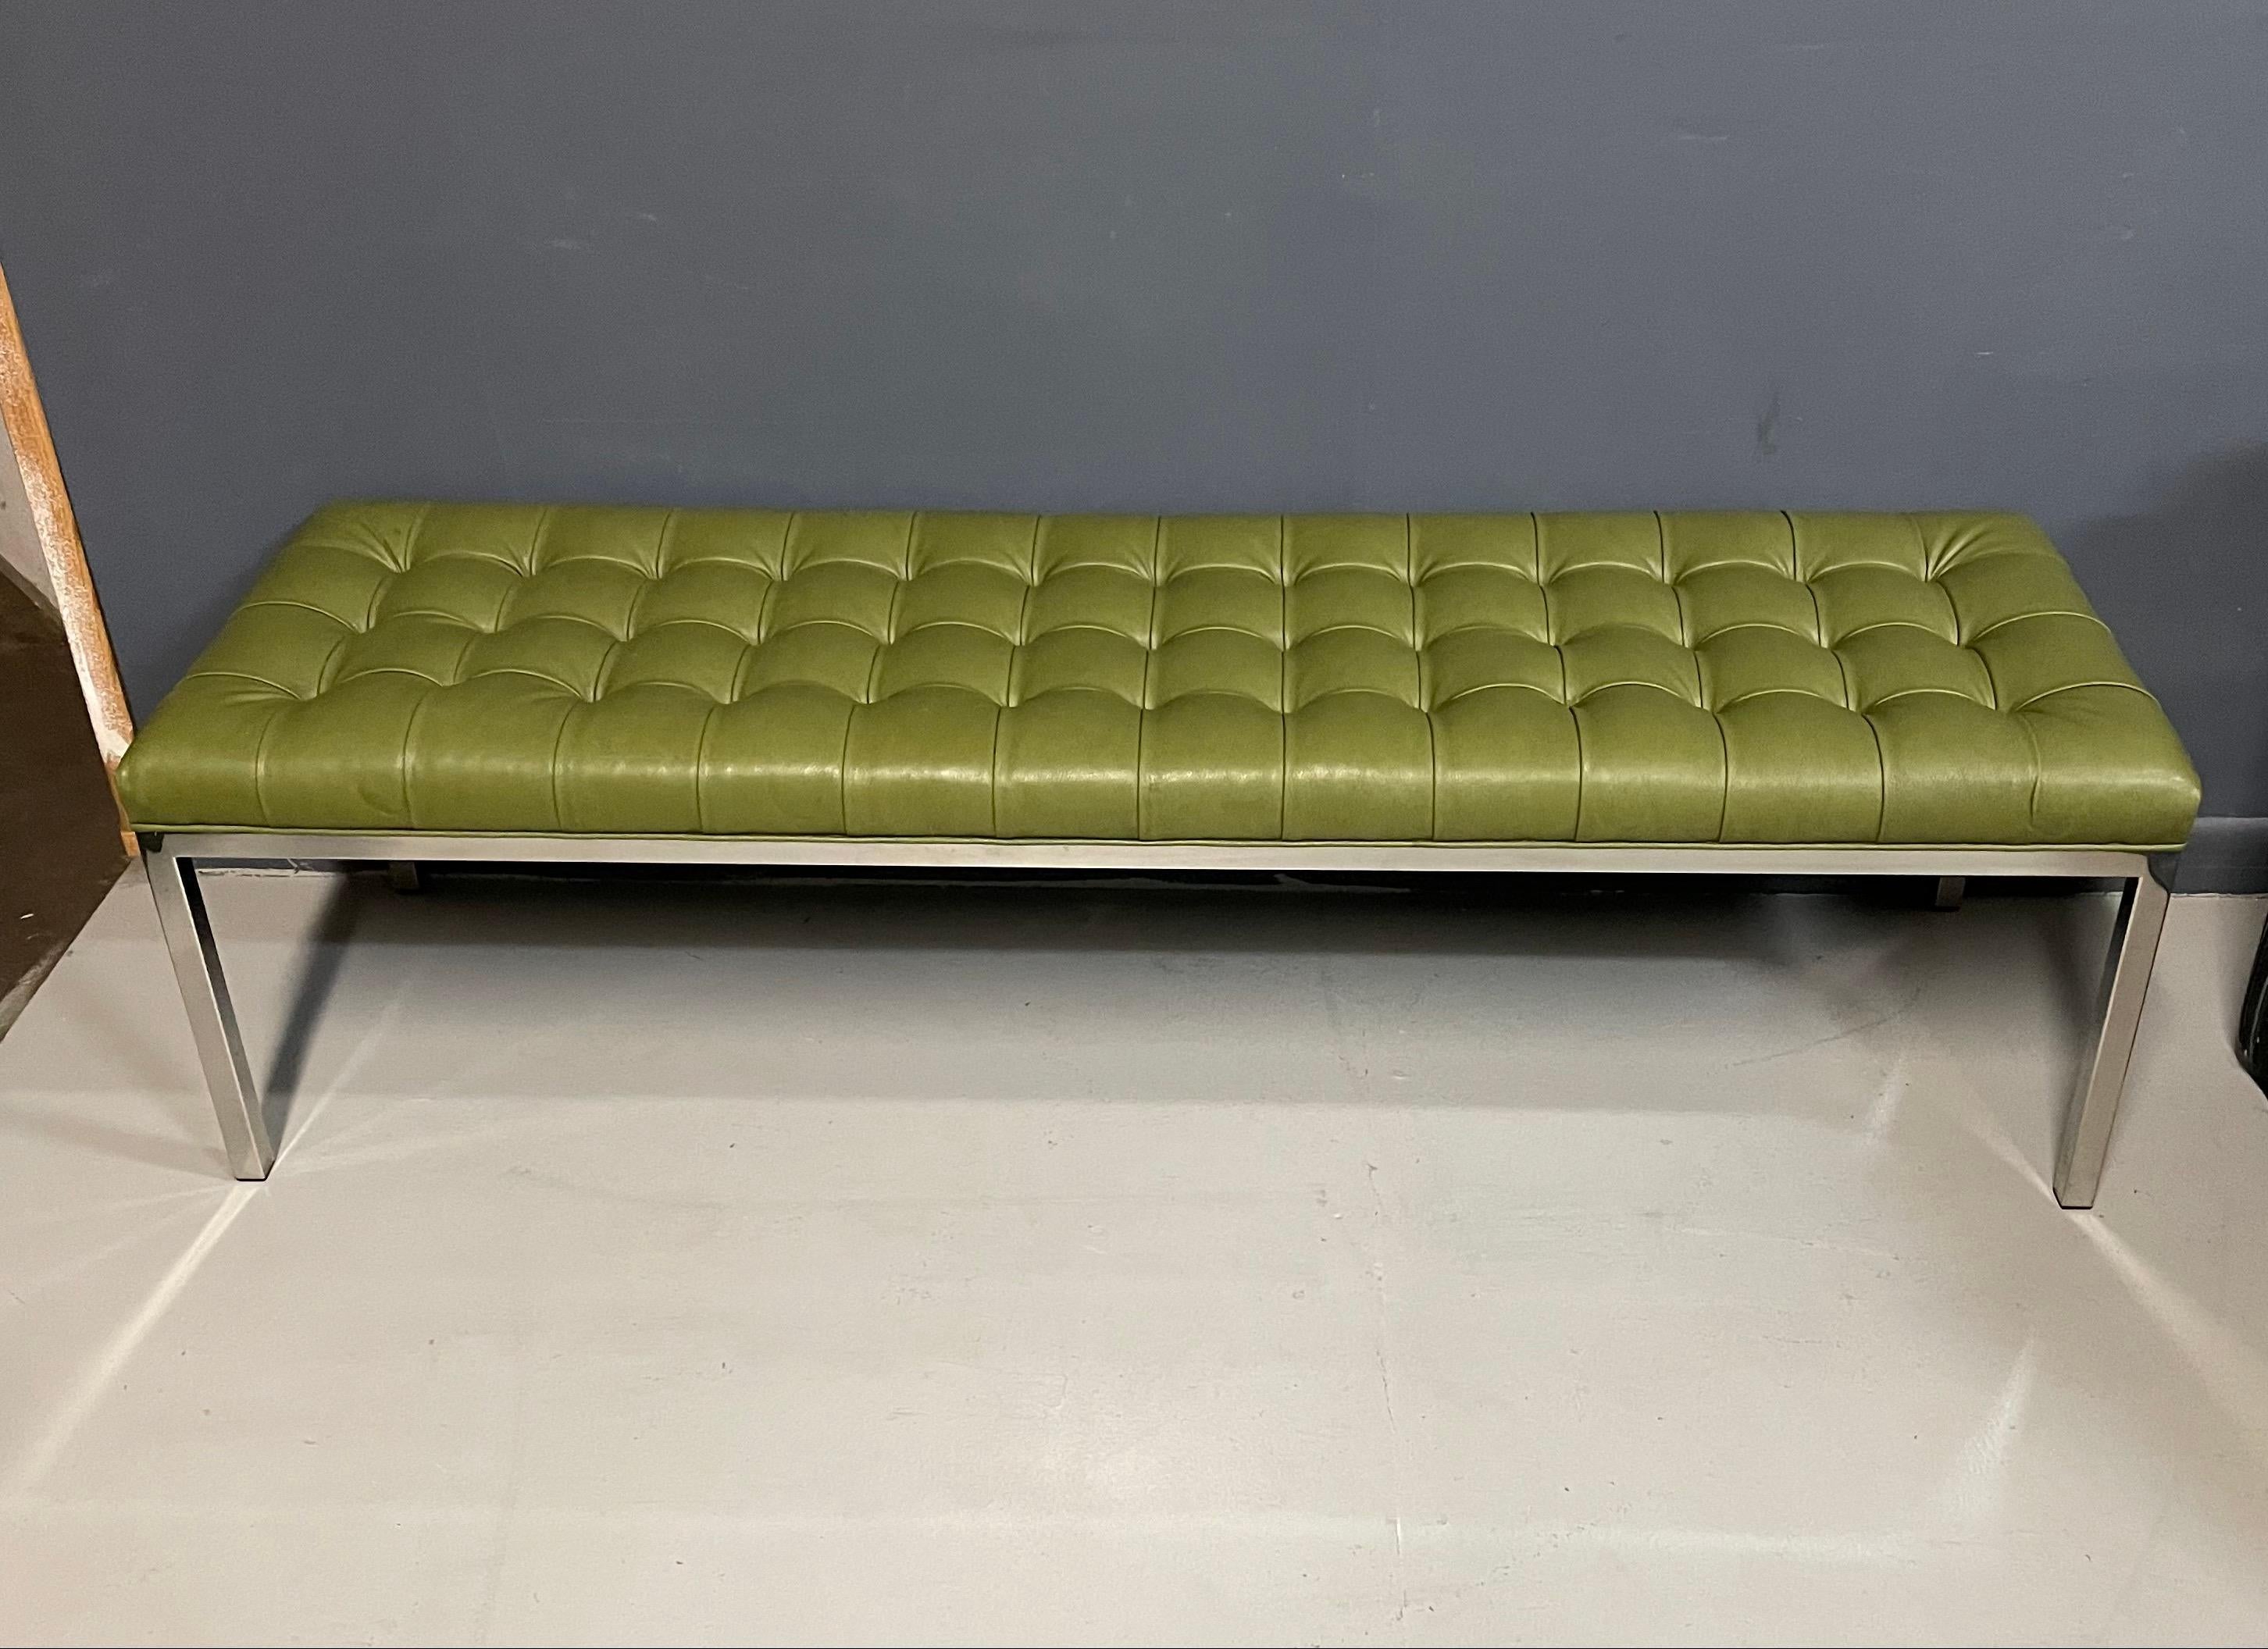 Classic 1970s avocado color leather is the show stopper of this wonderful bench. Manufactured and labeled by Lehigh-Leopold, a quality US manufacturer of the period.